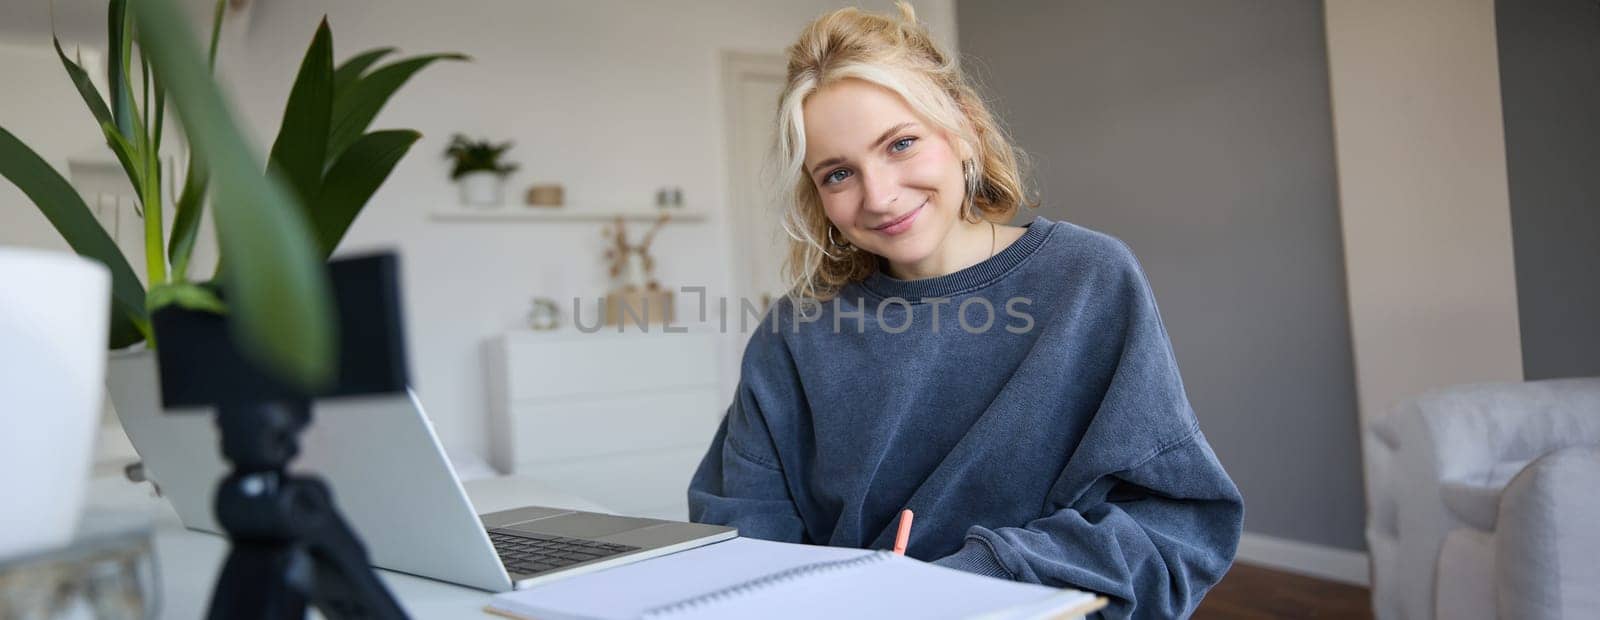 Portrait of beautiful smiling woman, student studying at home, remote education concept, sits in a room with laptop and writes down notes, uses her journal.